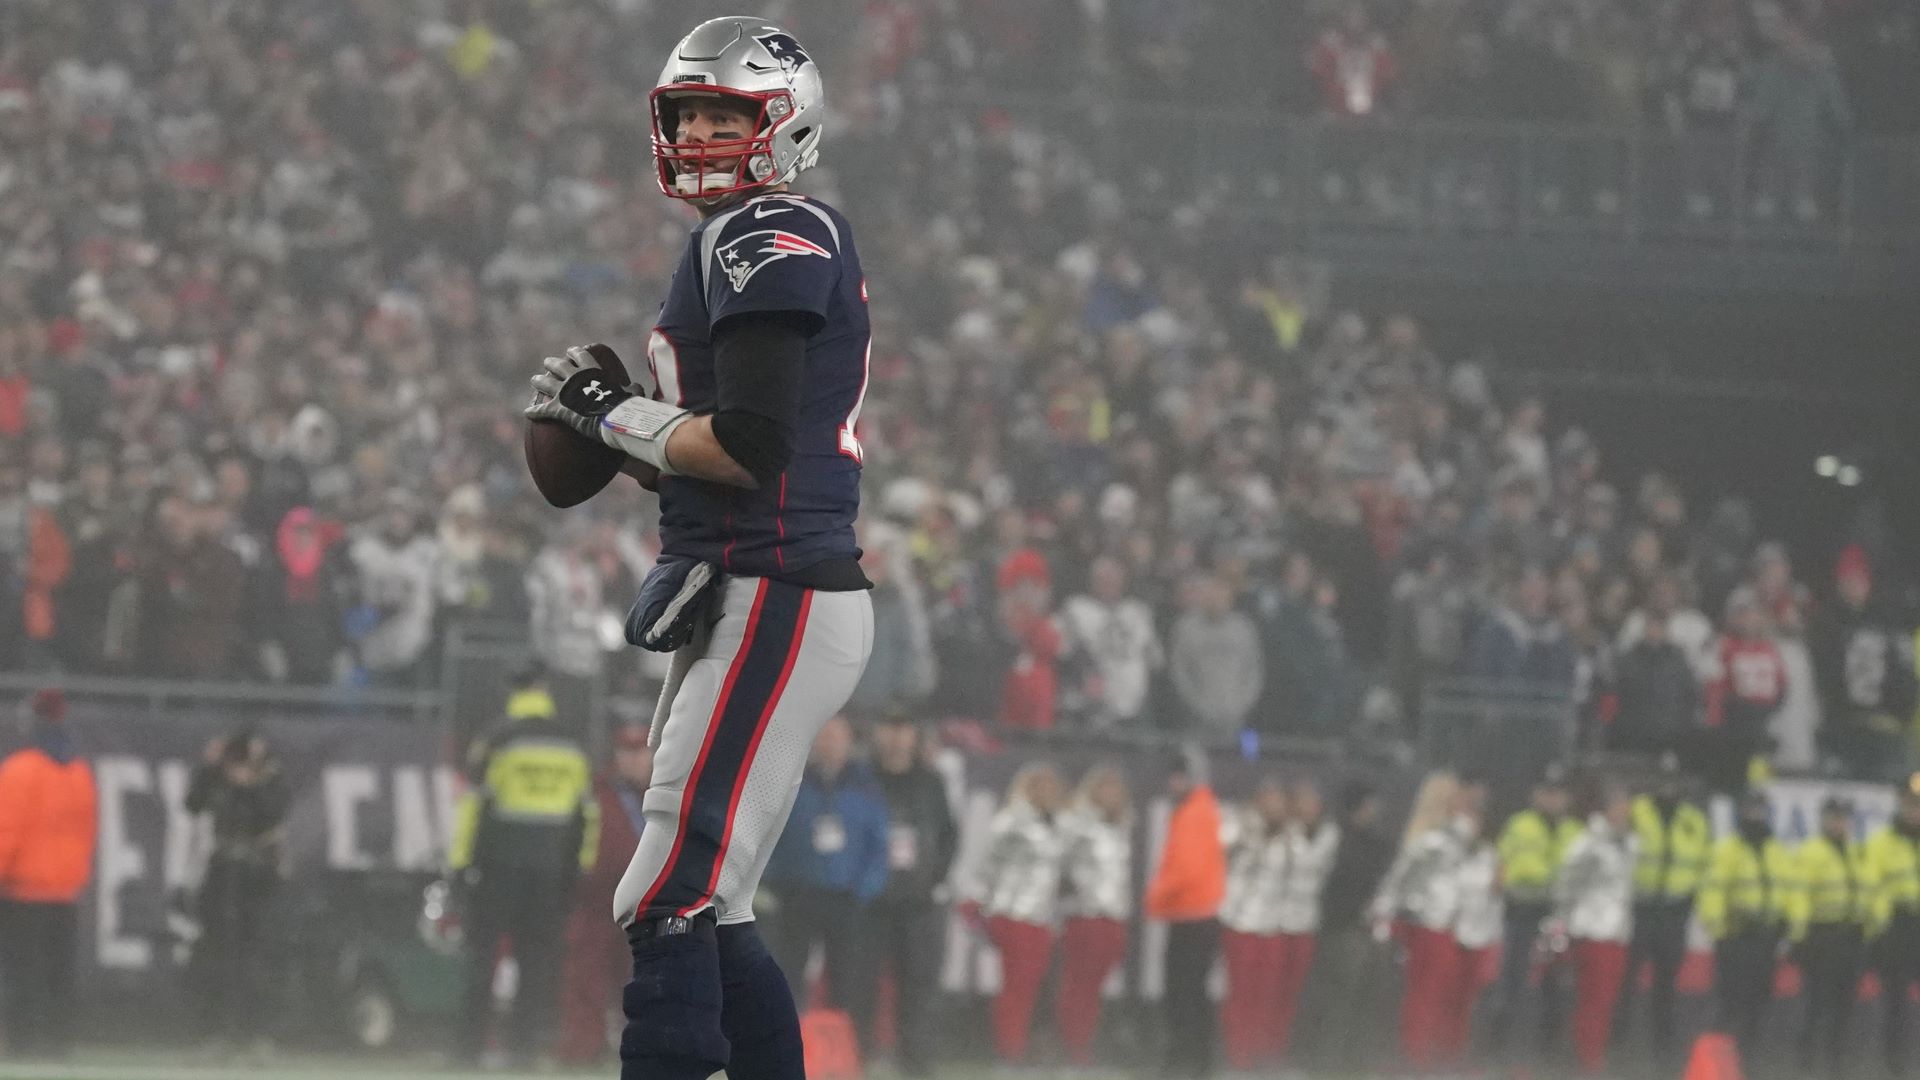 Tom Brady on being honored by Patriots: 'A really special reunion'